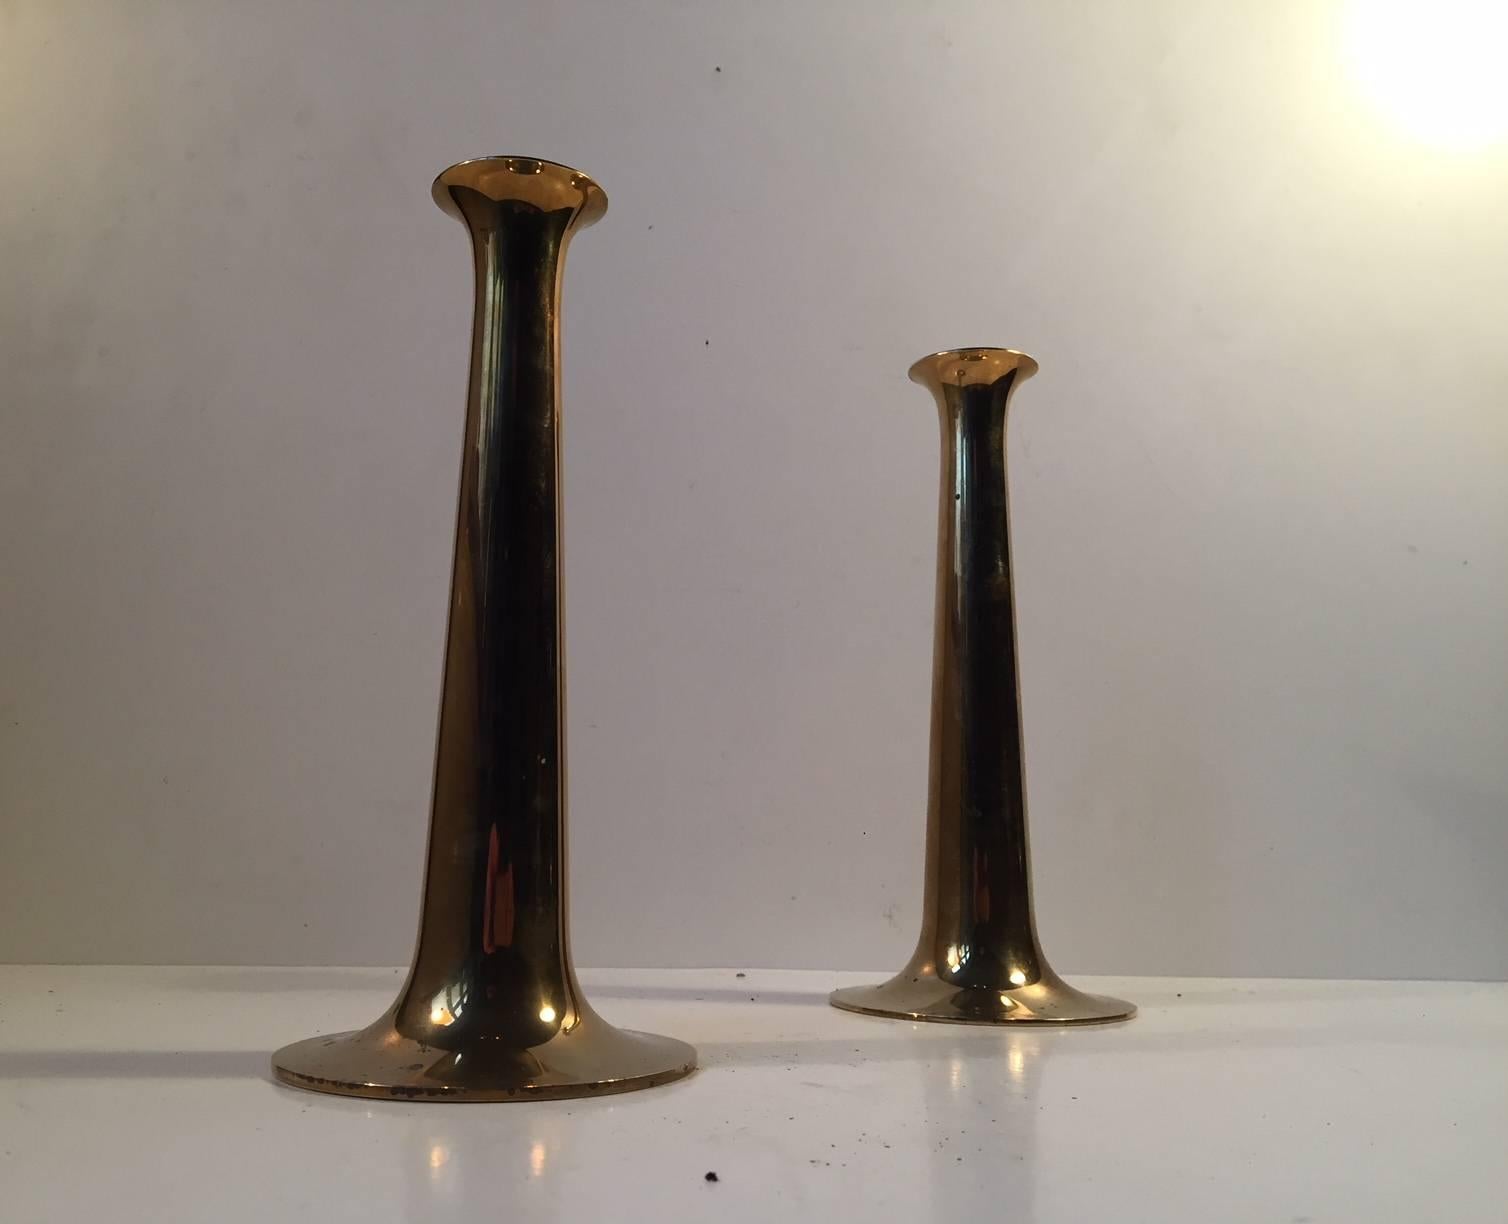 This pair of candlesticks were designed Hans Bolling and manufactured by Torben Ørskov in Denmark during the 1960s. They are made from solid brass and feature the manufacturer's mark to each base.